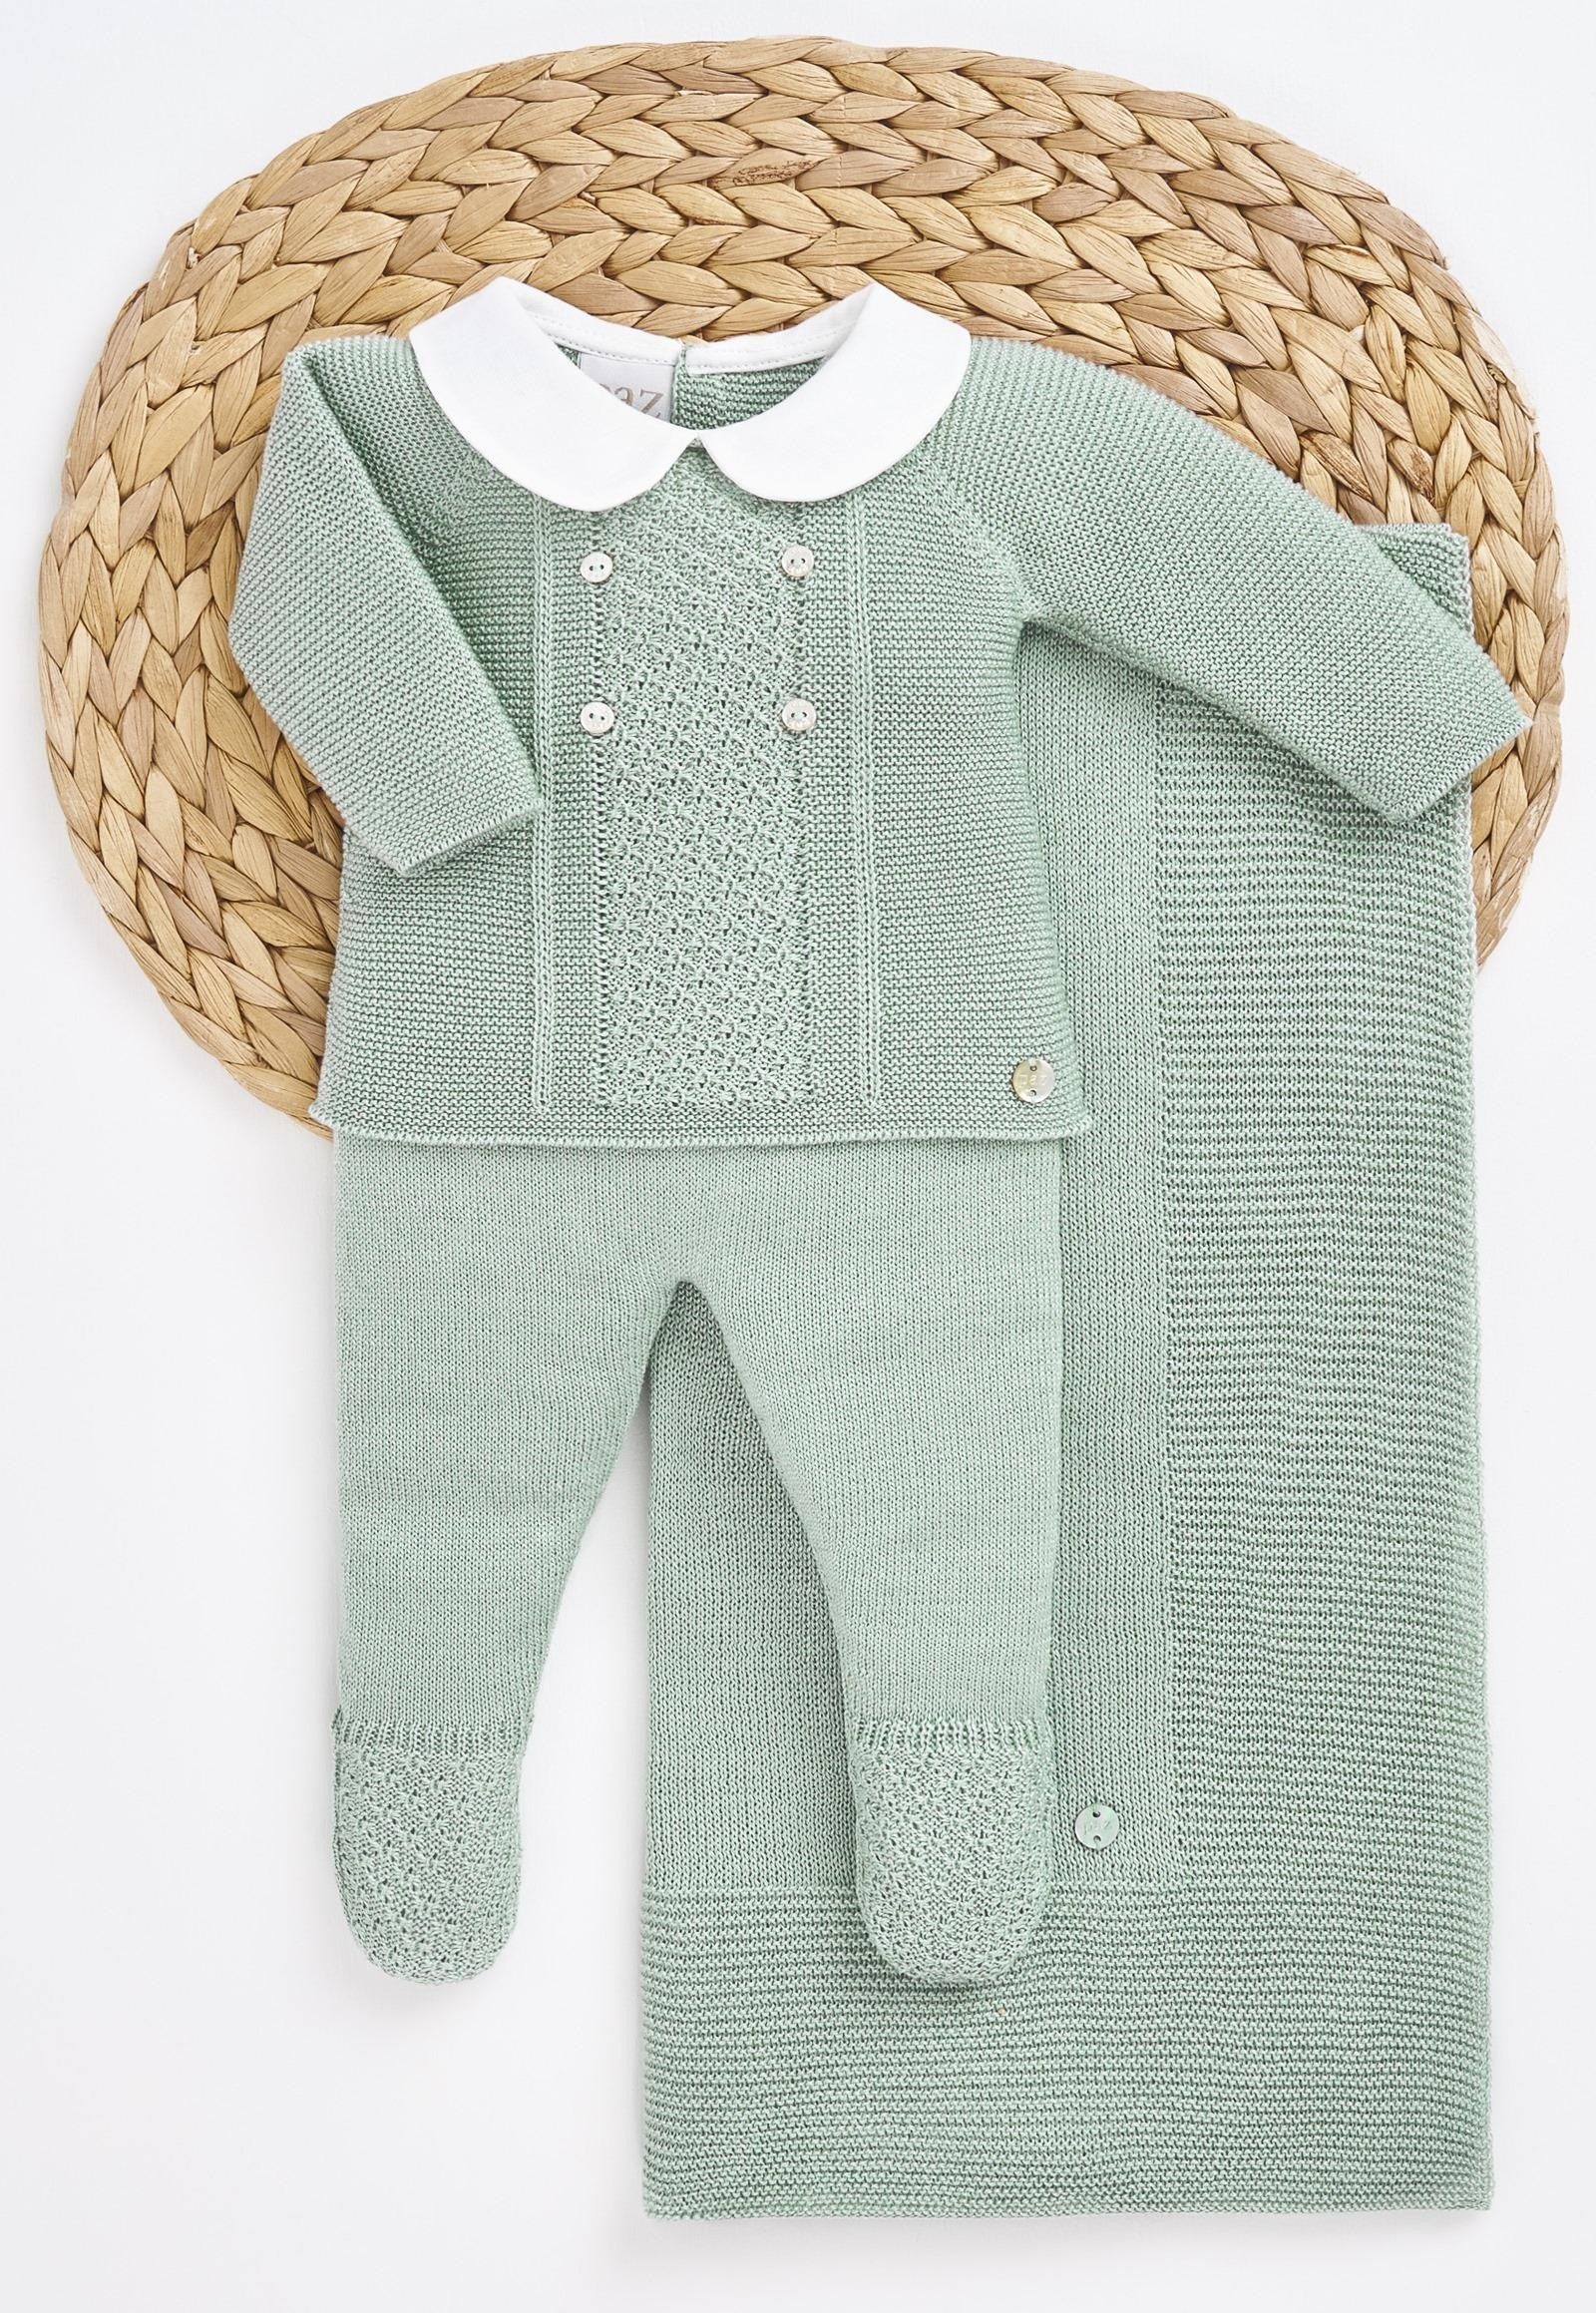 Paz Rodriguez 3-Piece Knitted (Top, Pants, Blanket) Gift Set - Green